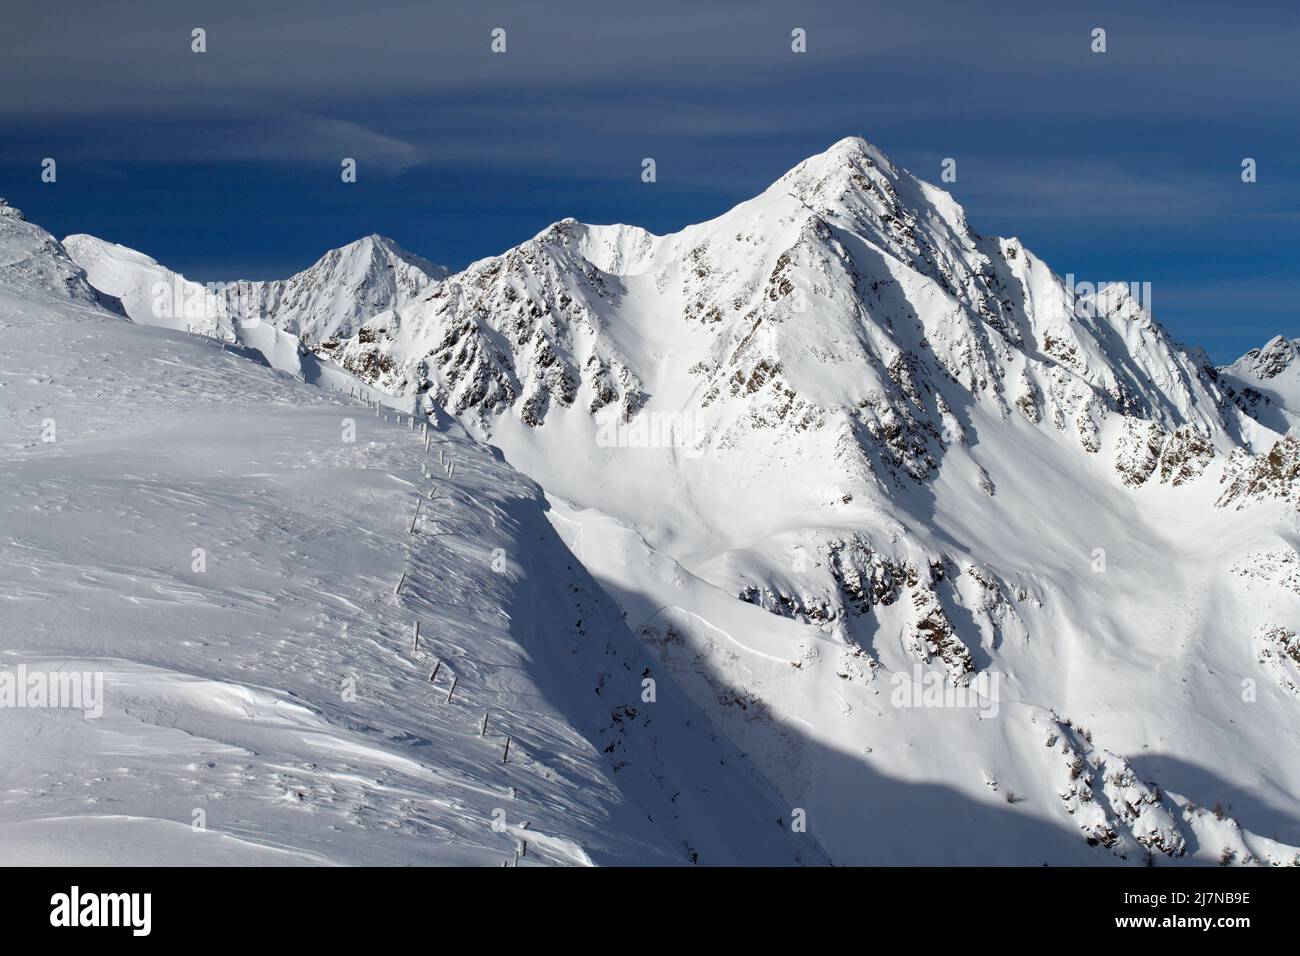 Mountains in intalian alps with small avalanche Stock Photo